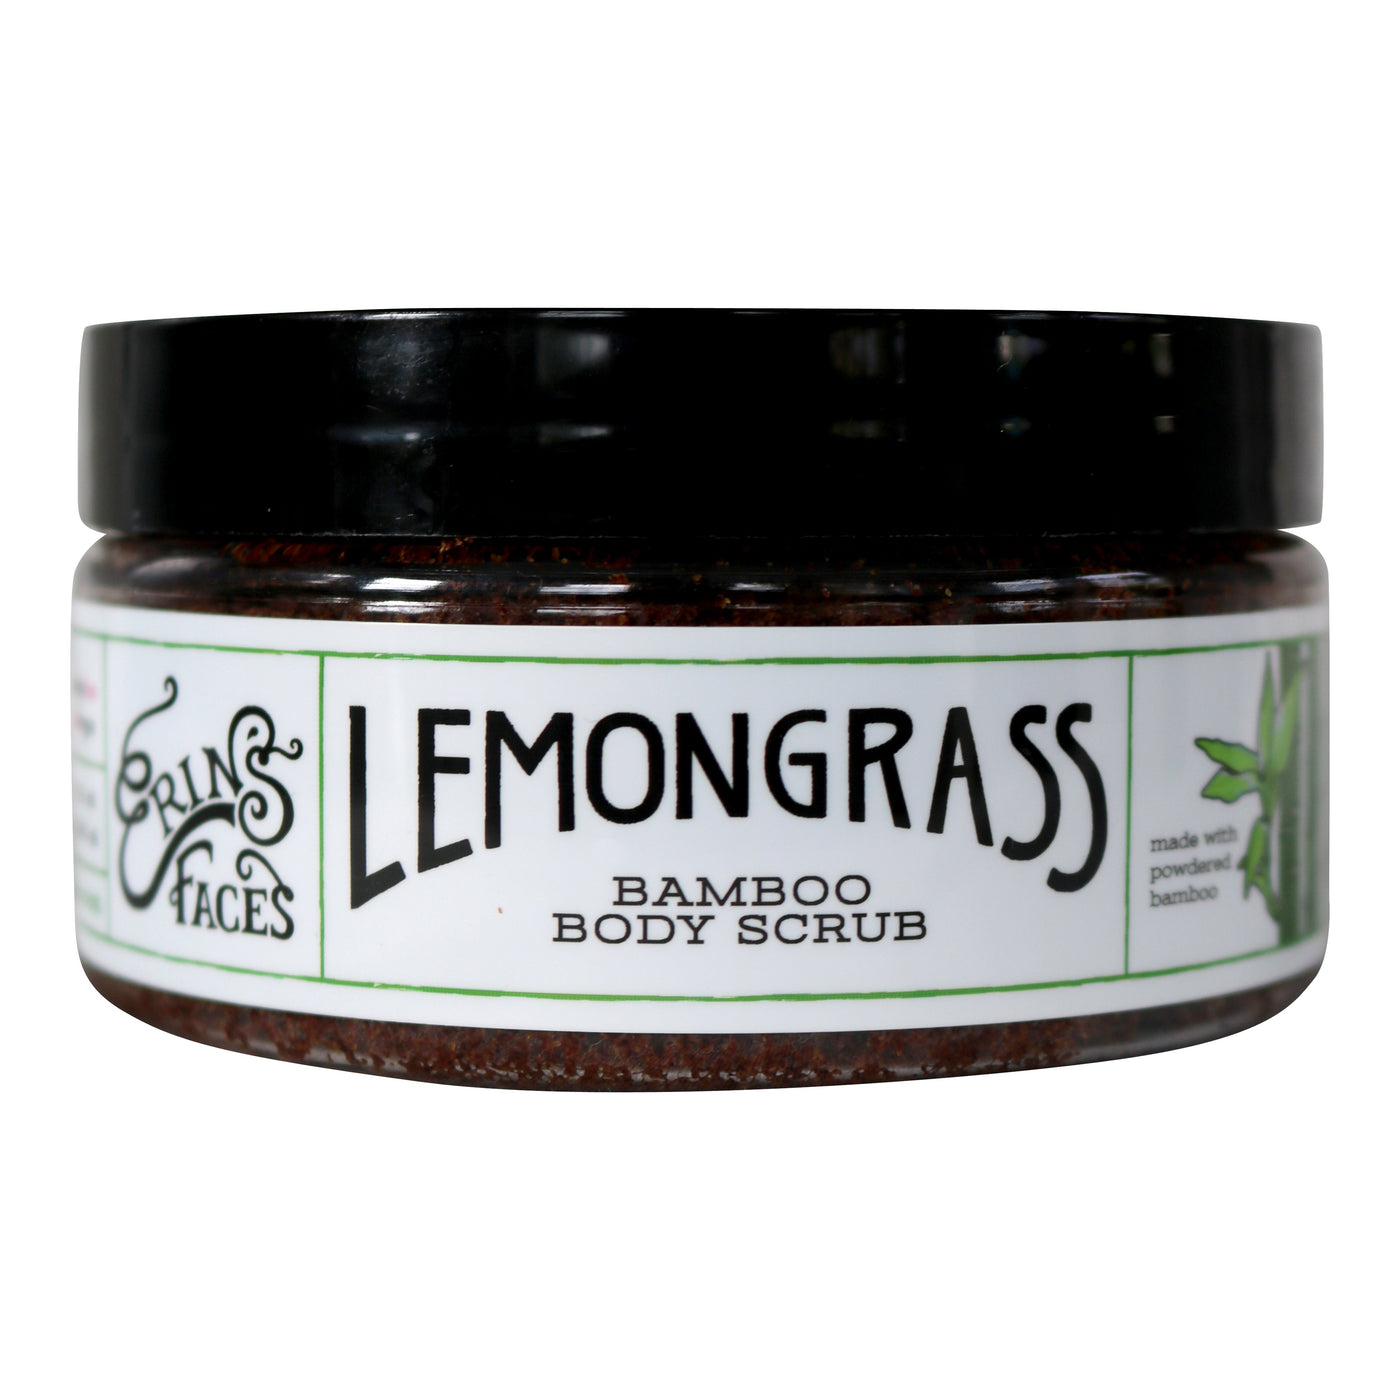 lemongrass bamboo body scrub exfoliant in a 8oz closed container